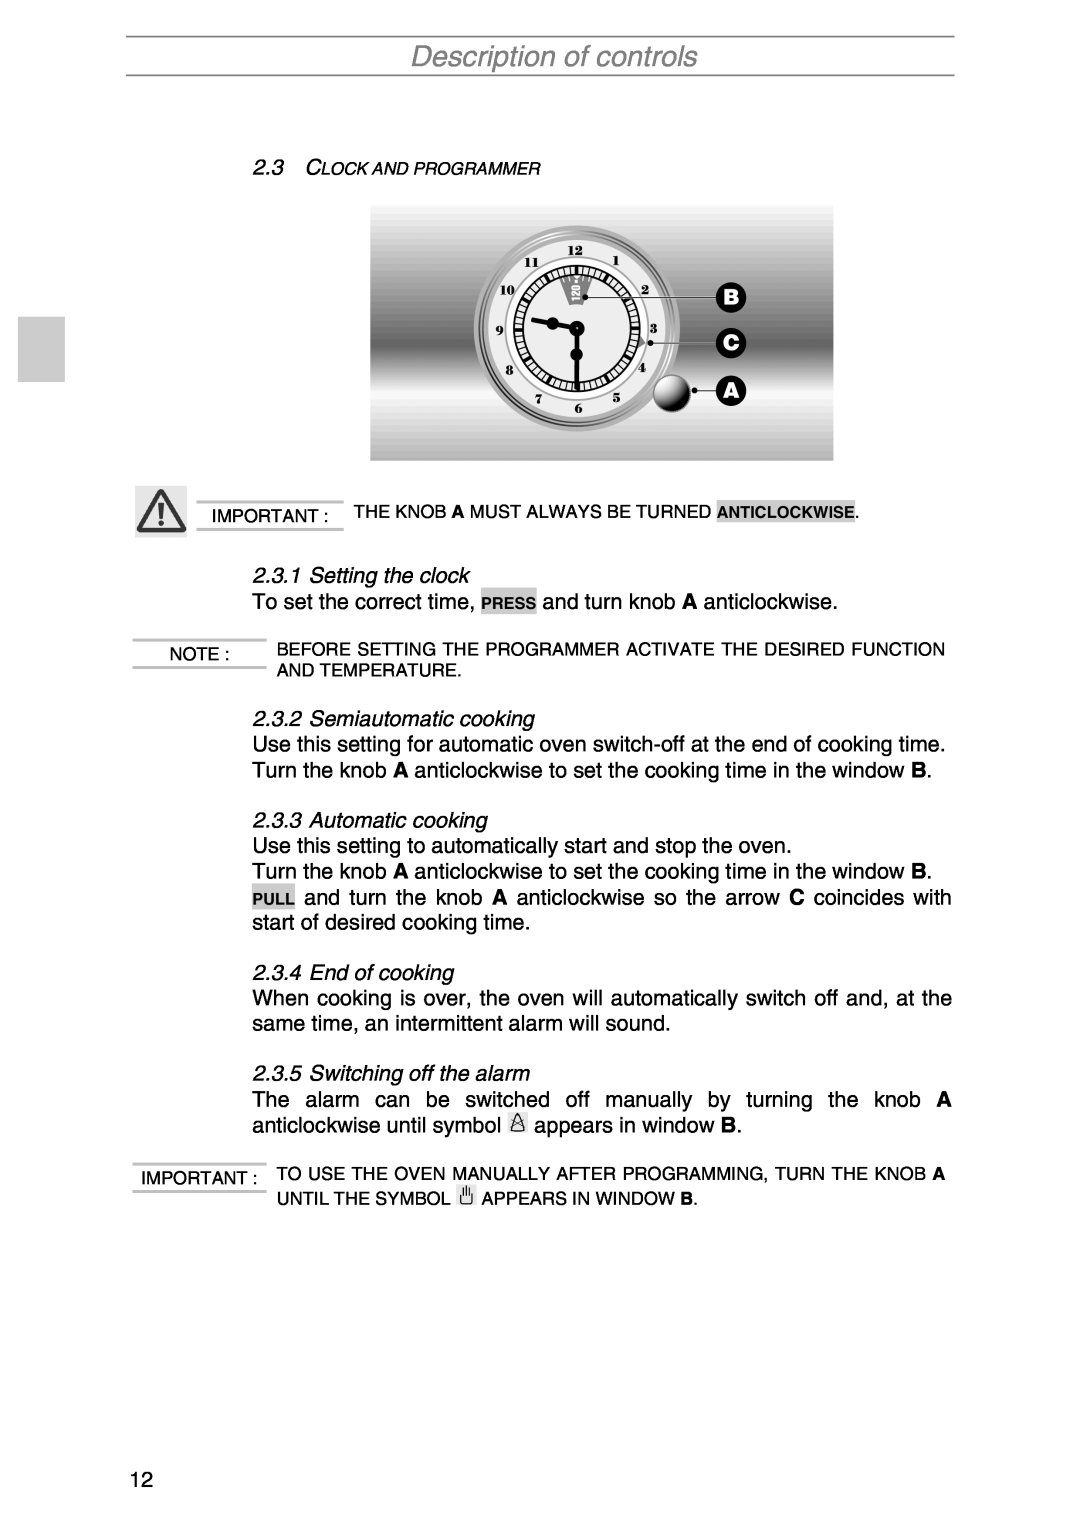 Smeg SIL290X manual Description of controls, Clock And Programmer, Important The Knob A Must Always Be Turned Anticlockwise 